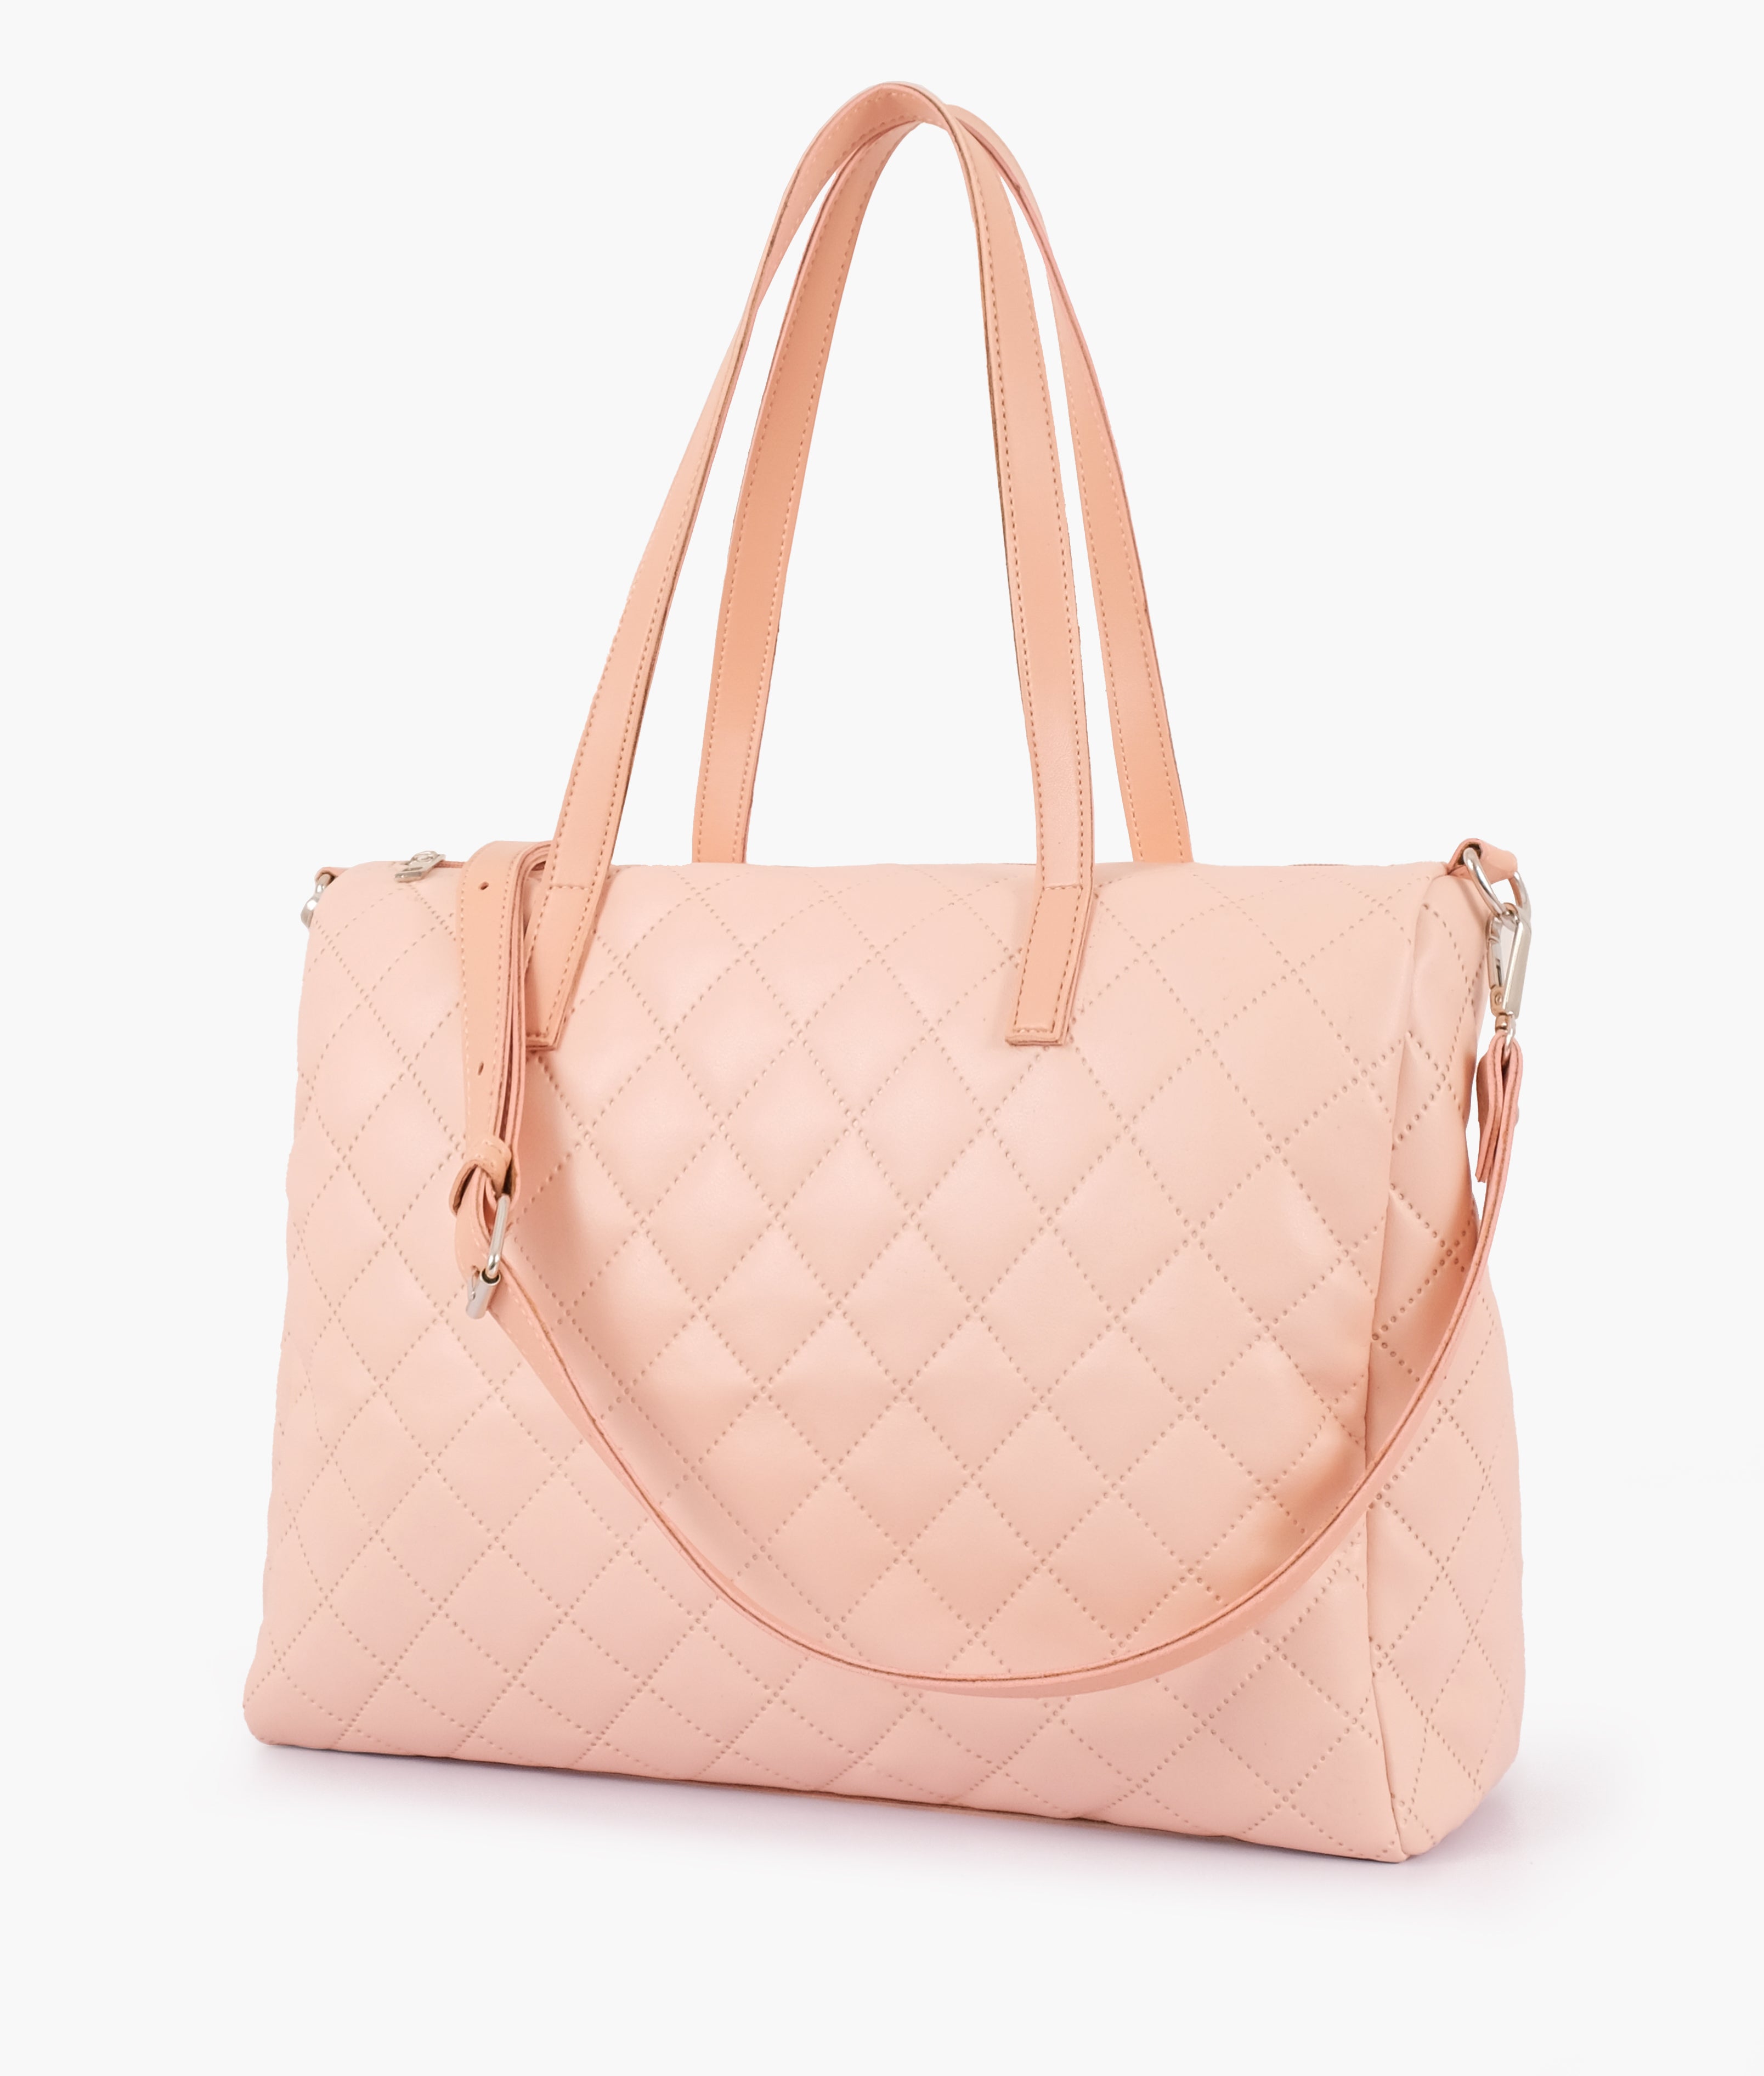 Baby pink quilted carryall tote bag